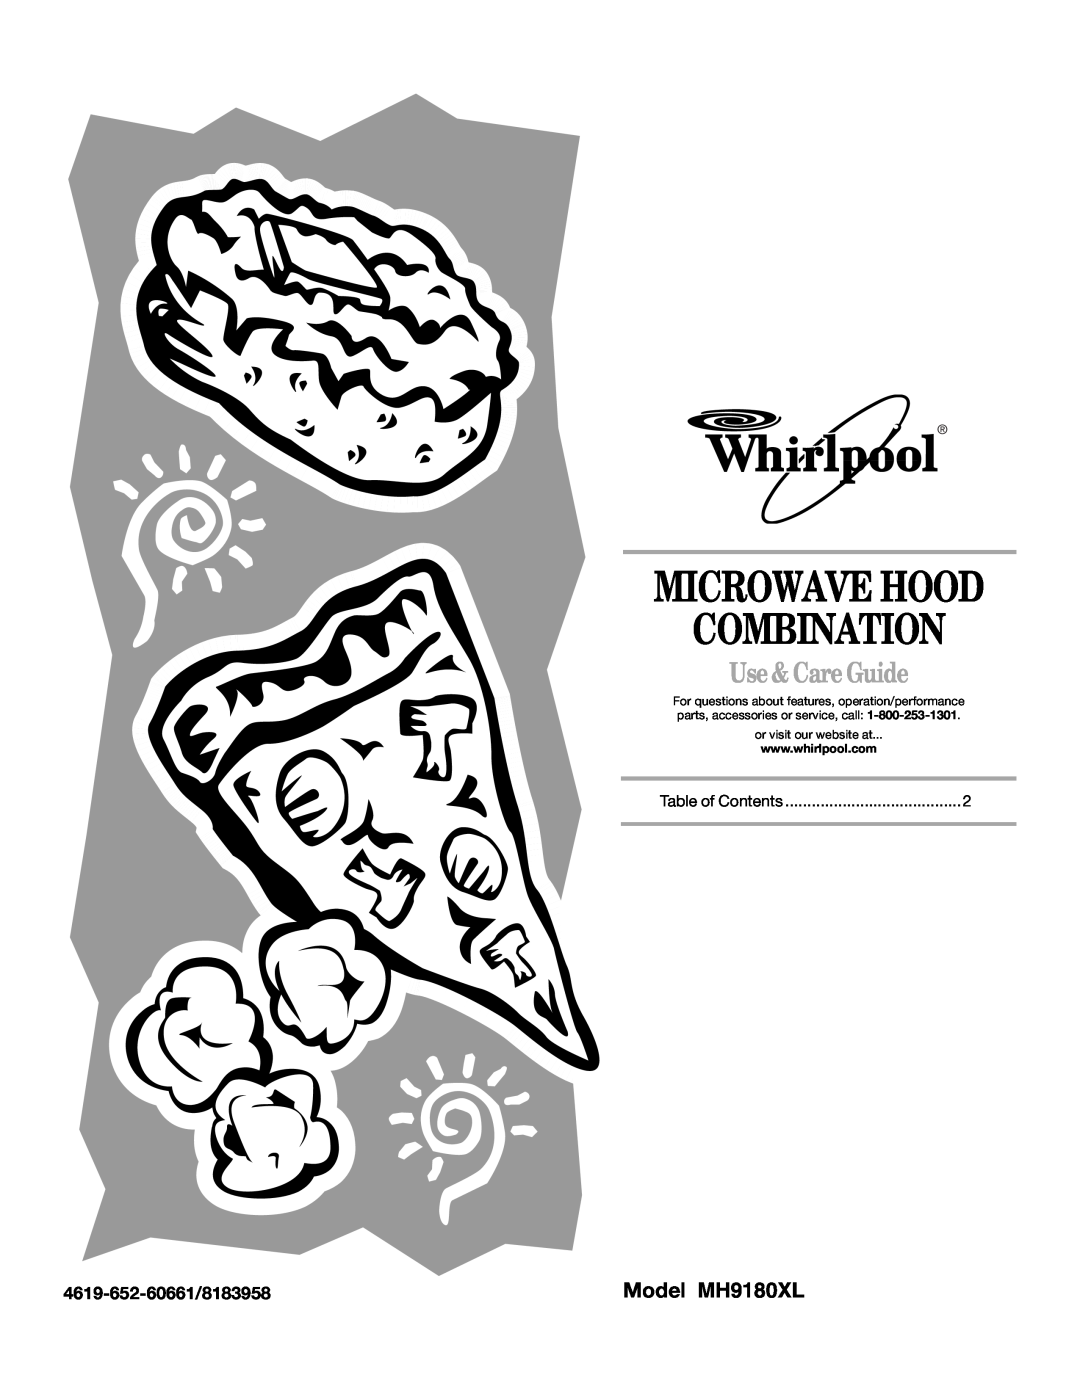 Whirlpool manual Microwave Hood Combination, Use & Care Guide, Model MH9180XL, or visit our website at 